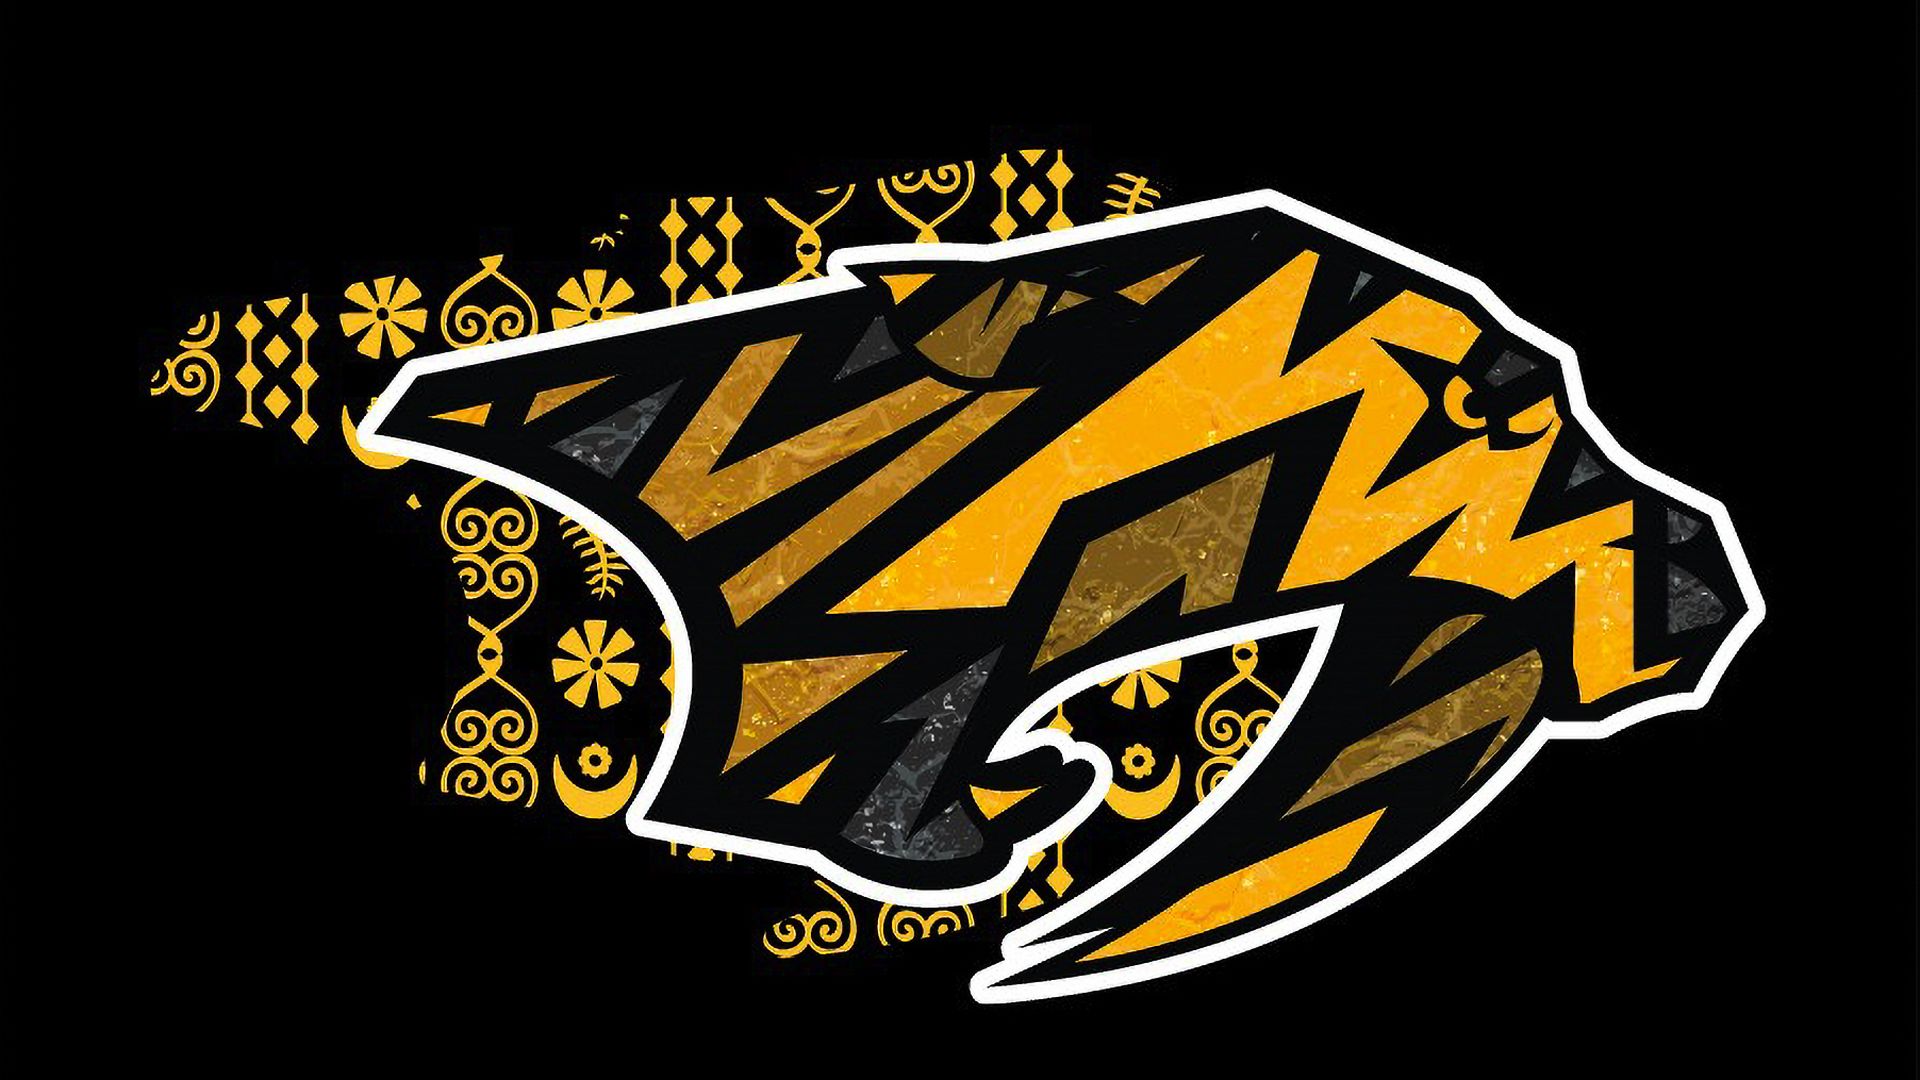 Part of the design for special Predators jerseys marking Black History Month. 